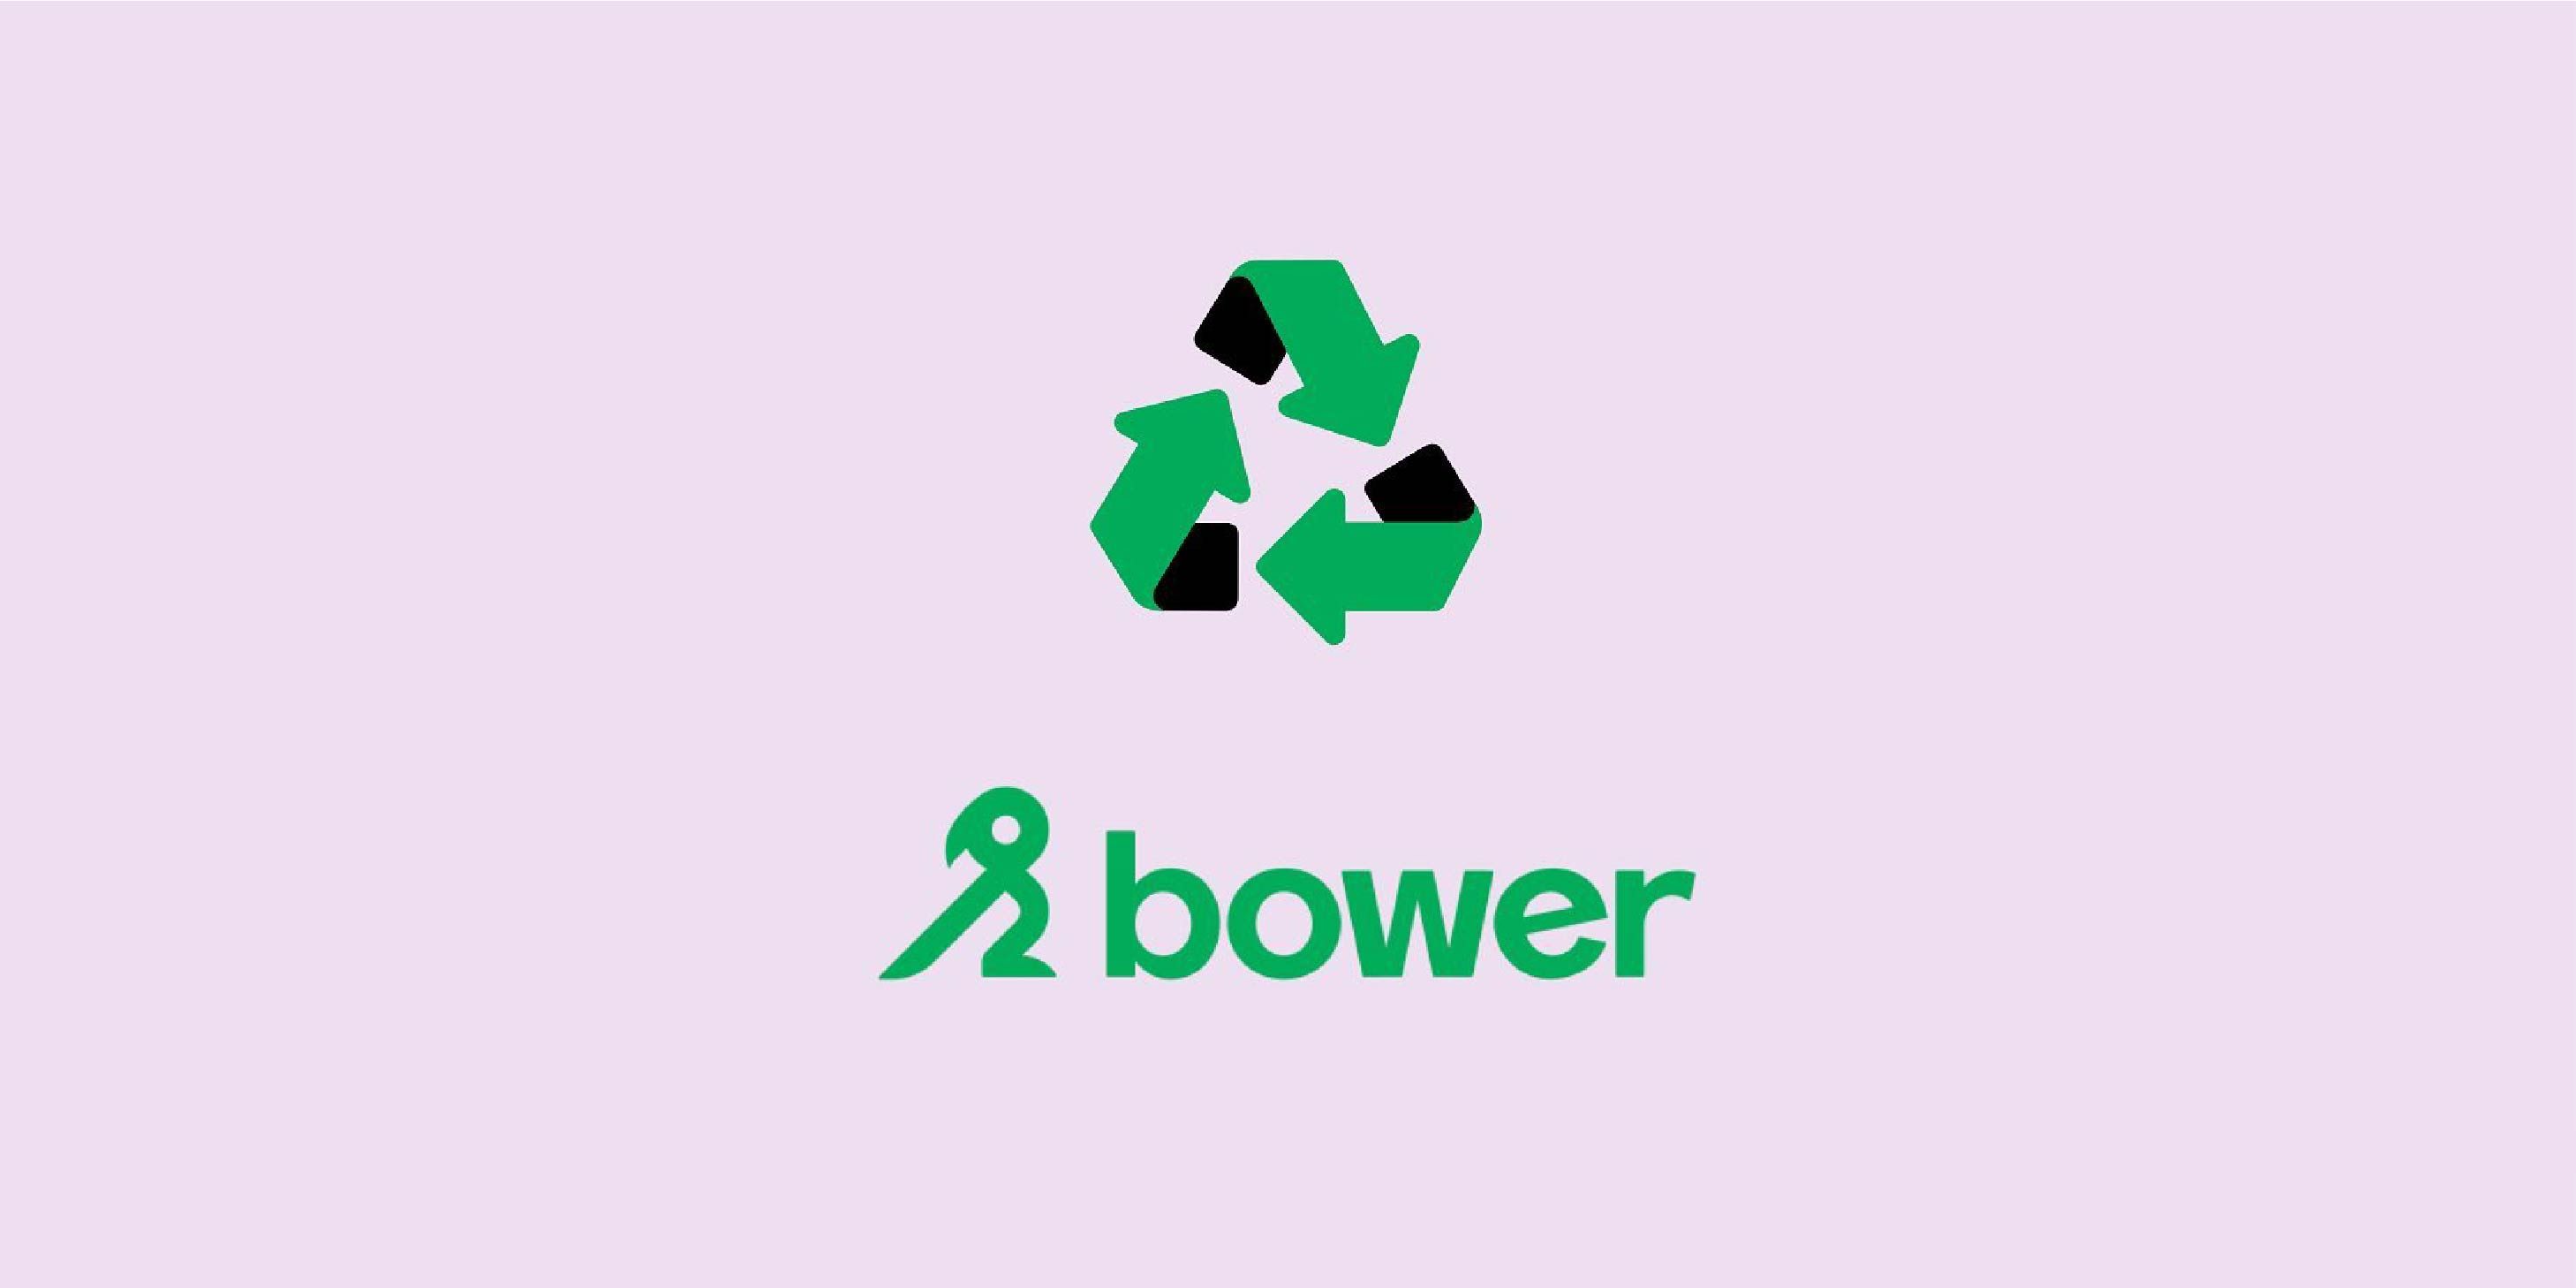 Recycle with bower